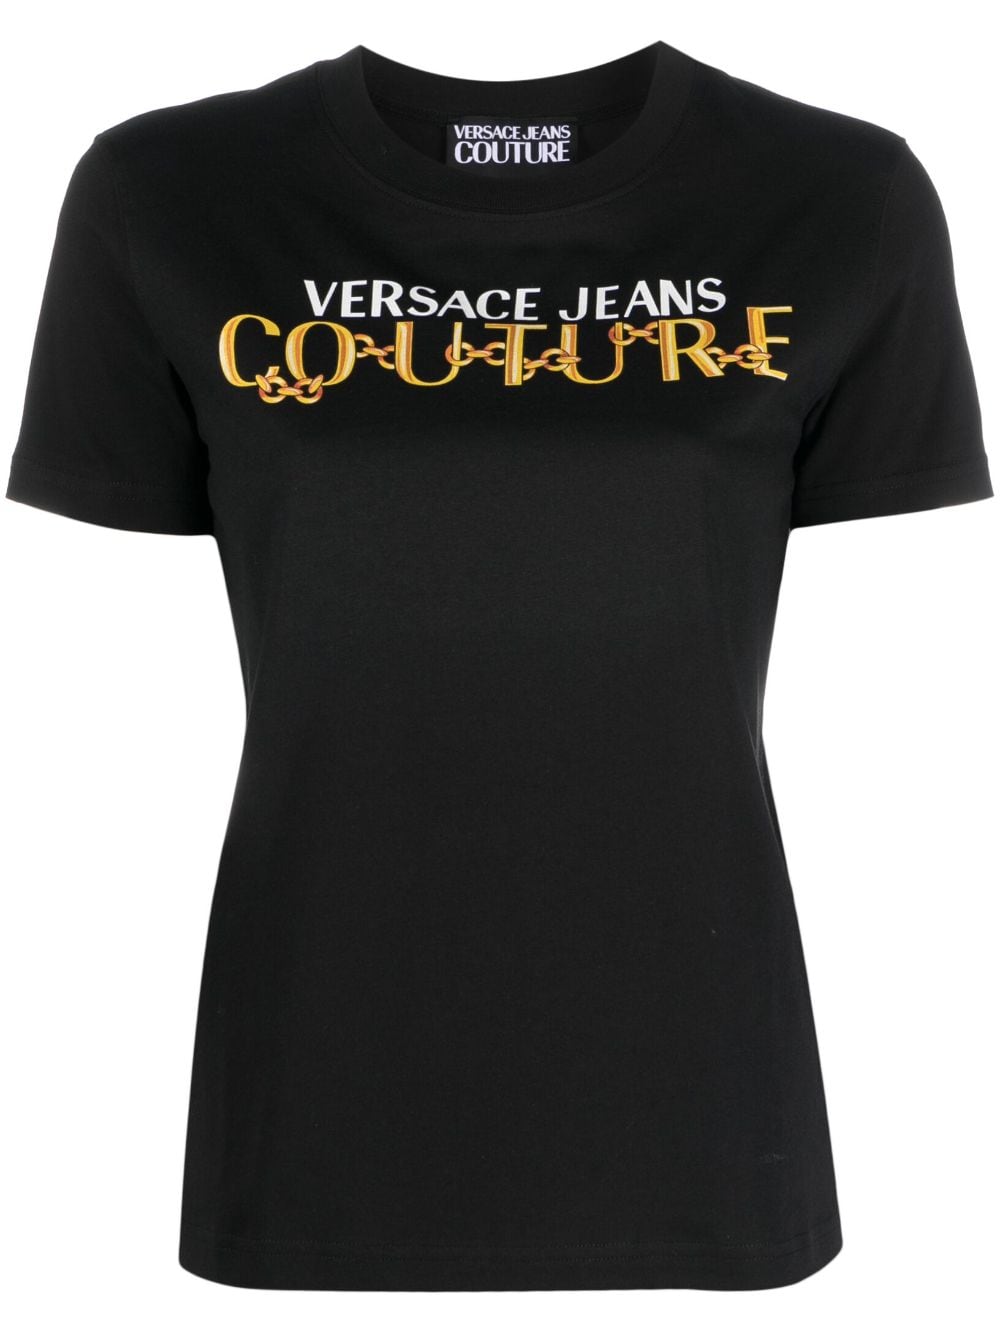 Versace Jeans Couture Logo Couture print T-shirt - Black von Versace Jeans Couture